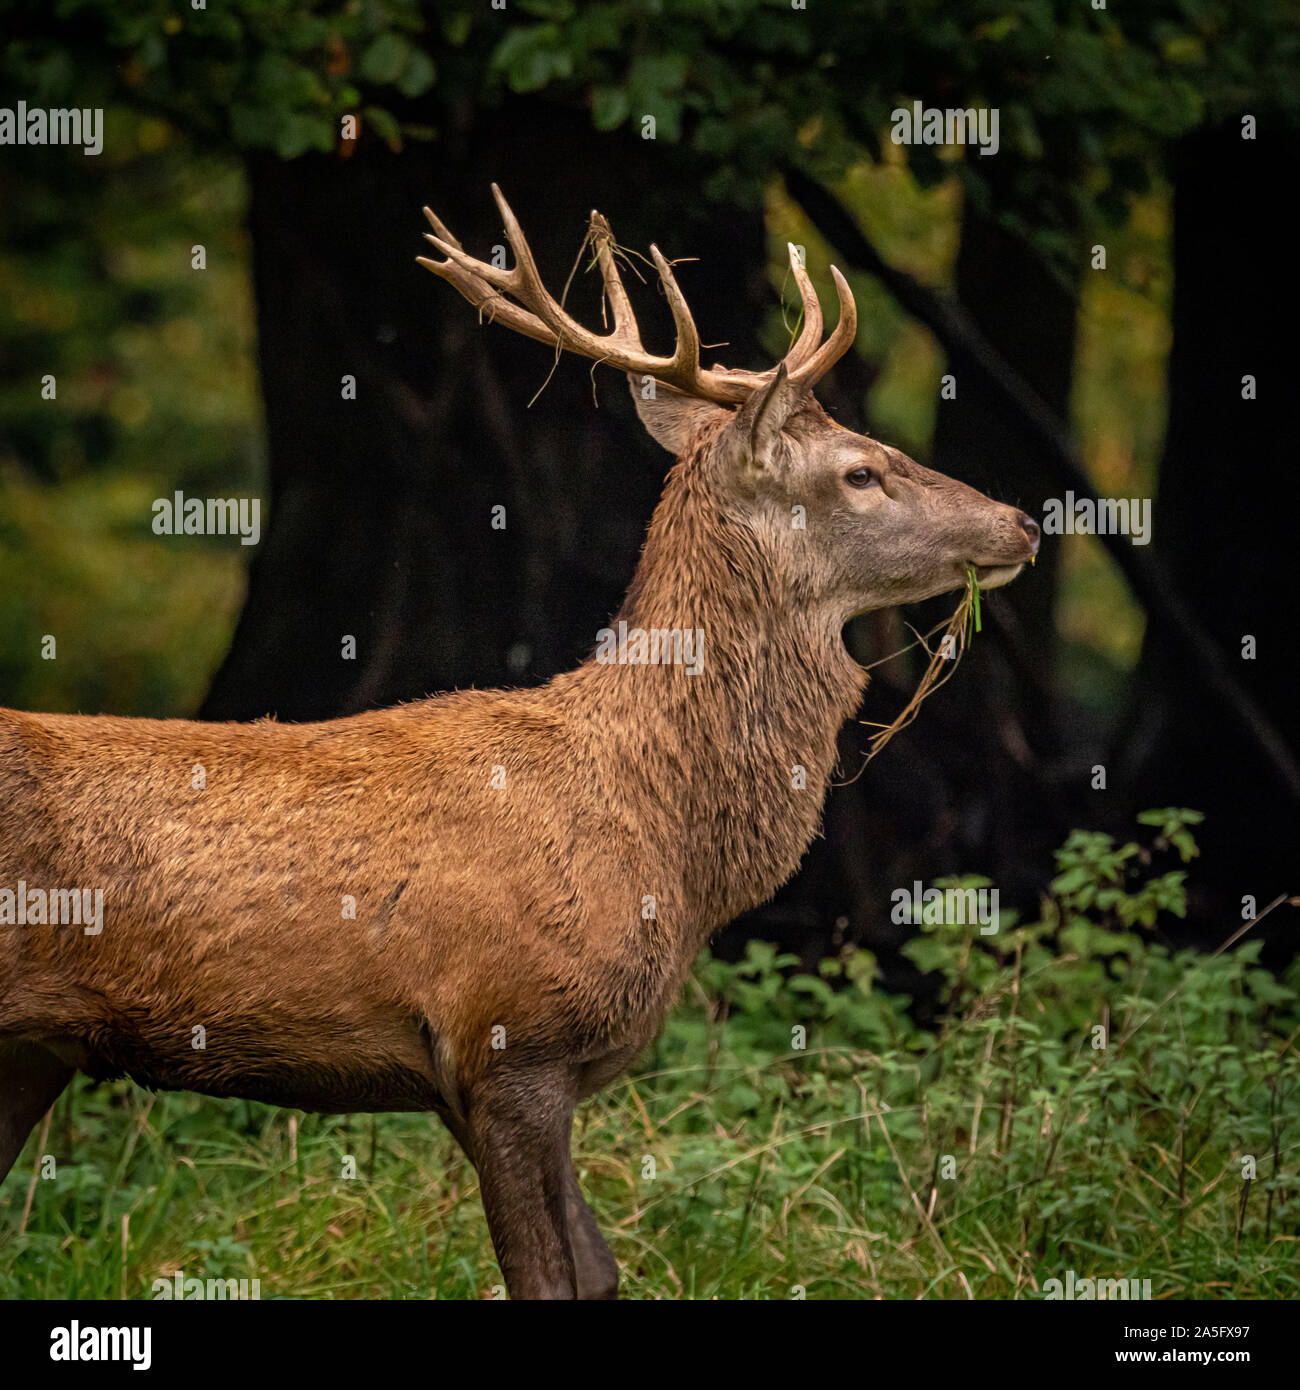 Red Deer Stag, Studley Royal Park, North Yorkshire, Regno Unito. Foto Stock